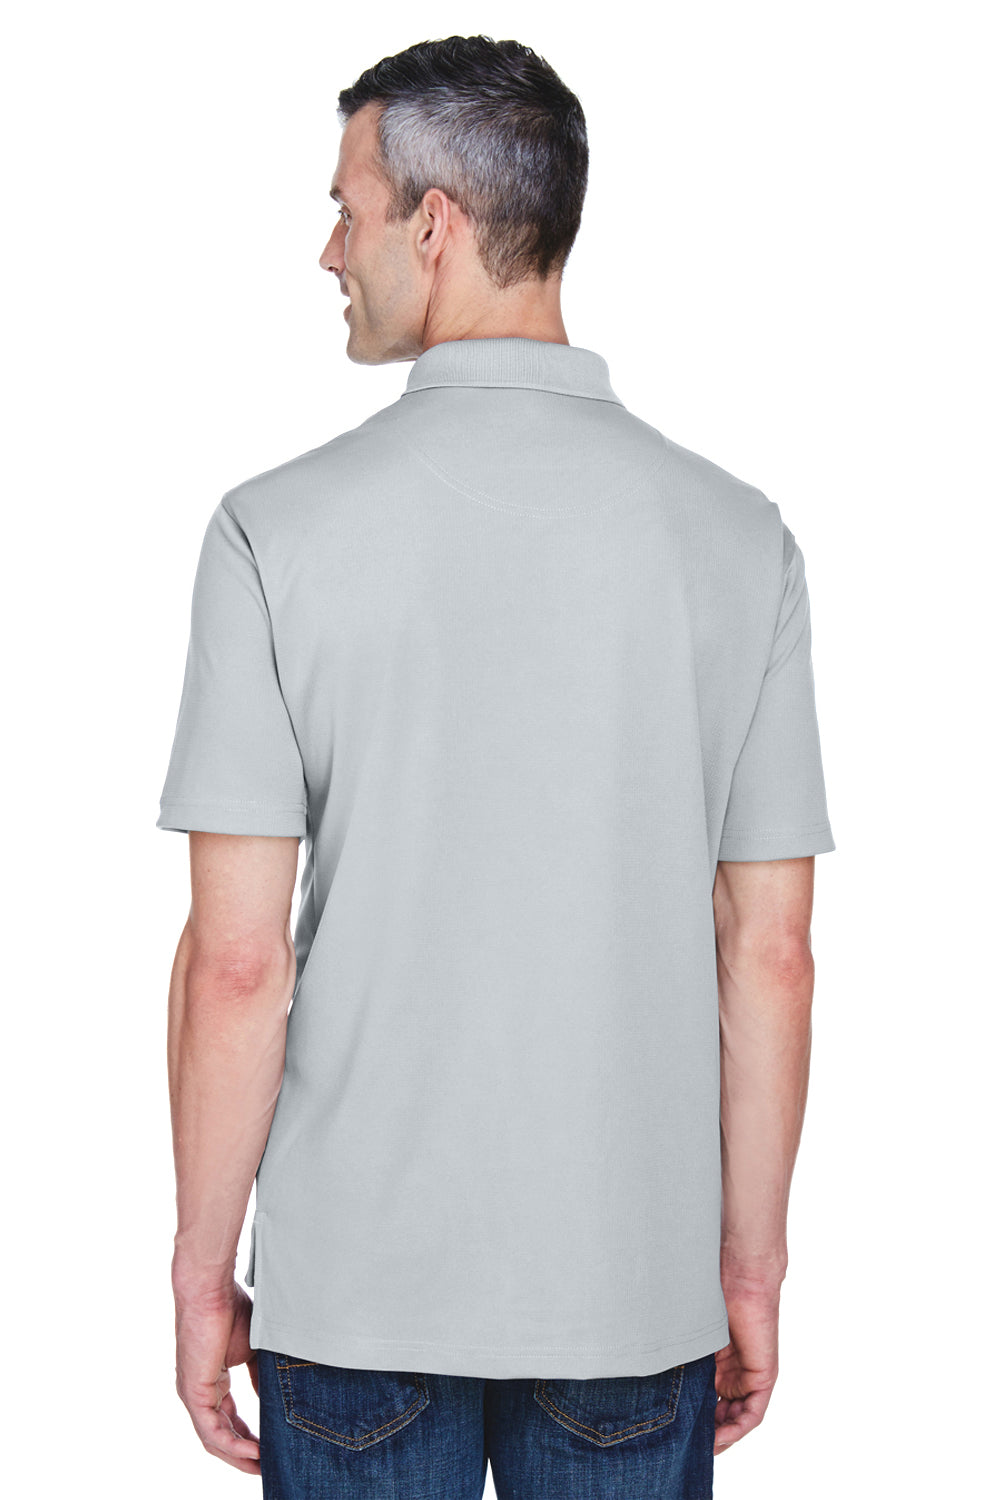 UltraClub 8445 Mens Cool & Dry Performance Moisture Wicking Short Sleeve Polo Shirt Silver Grey Back